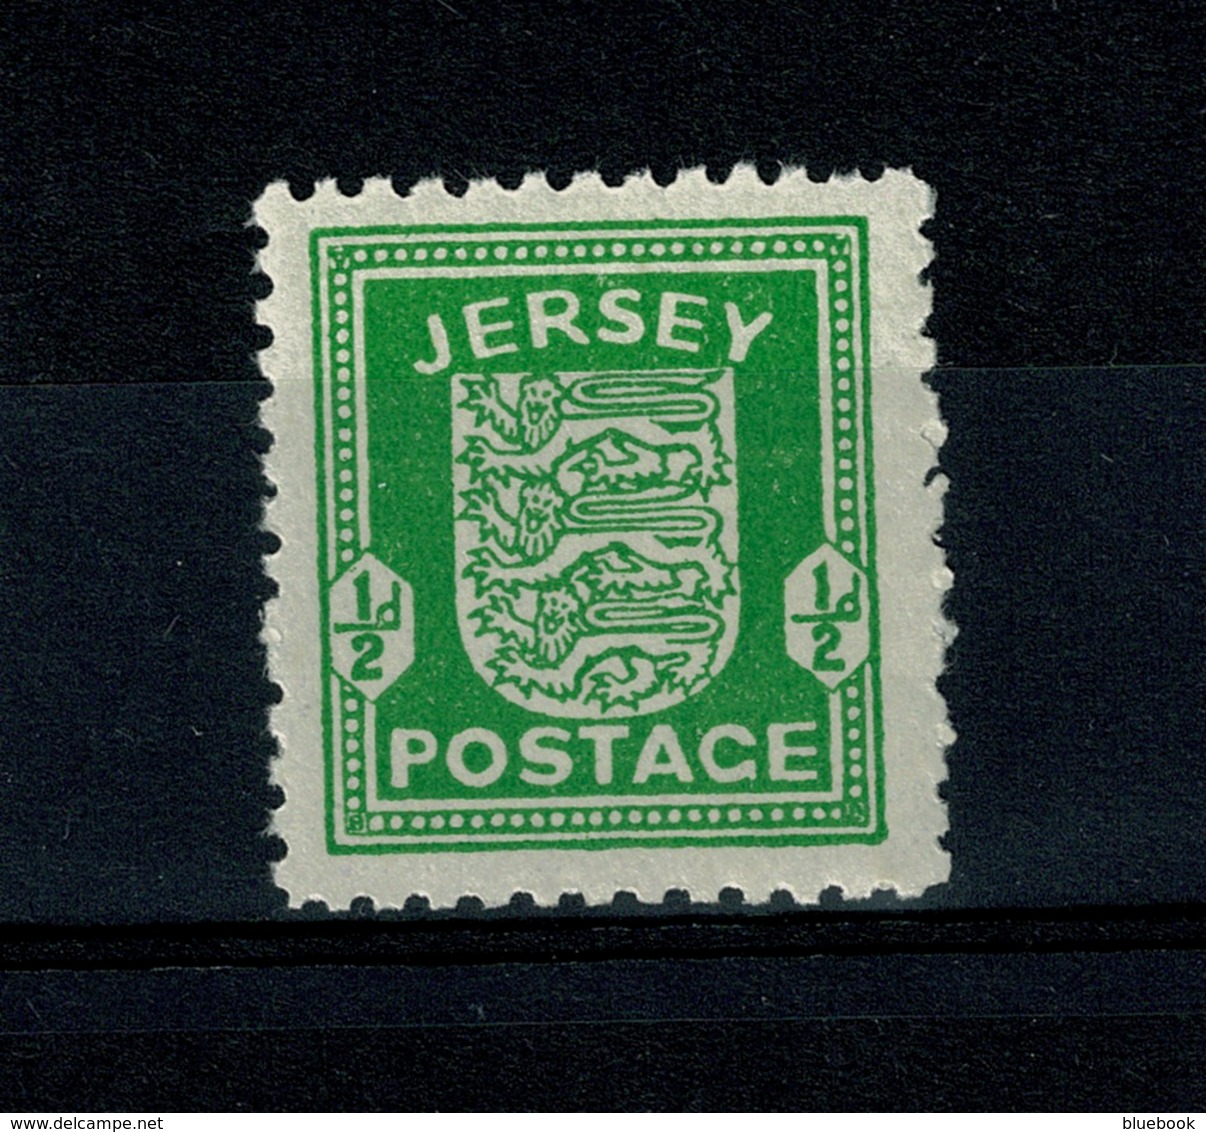 Ref 1354 - WWII Channel Islands - Jersey 1943 SG 1 - 1/2d MNH Stamp Cat £8 - Jersey